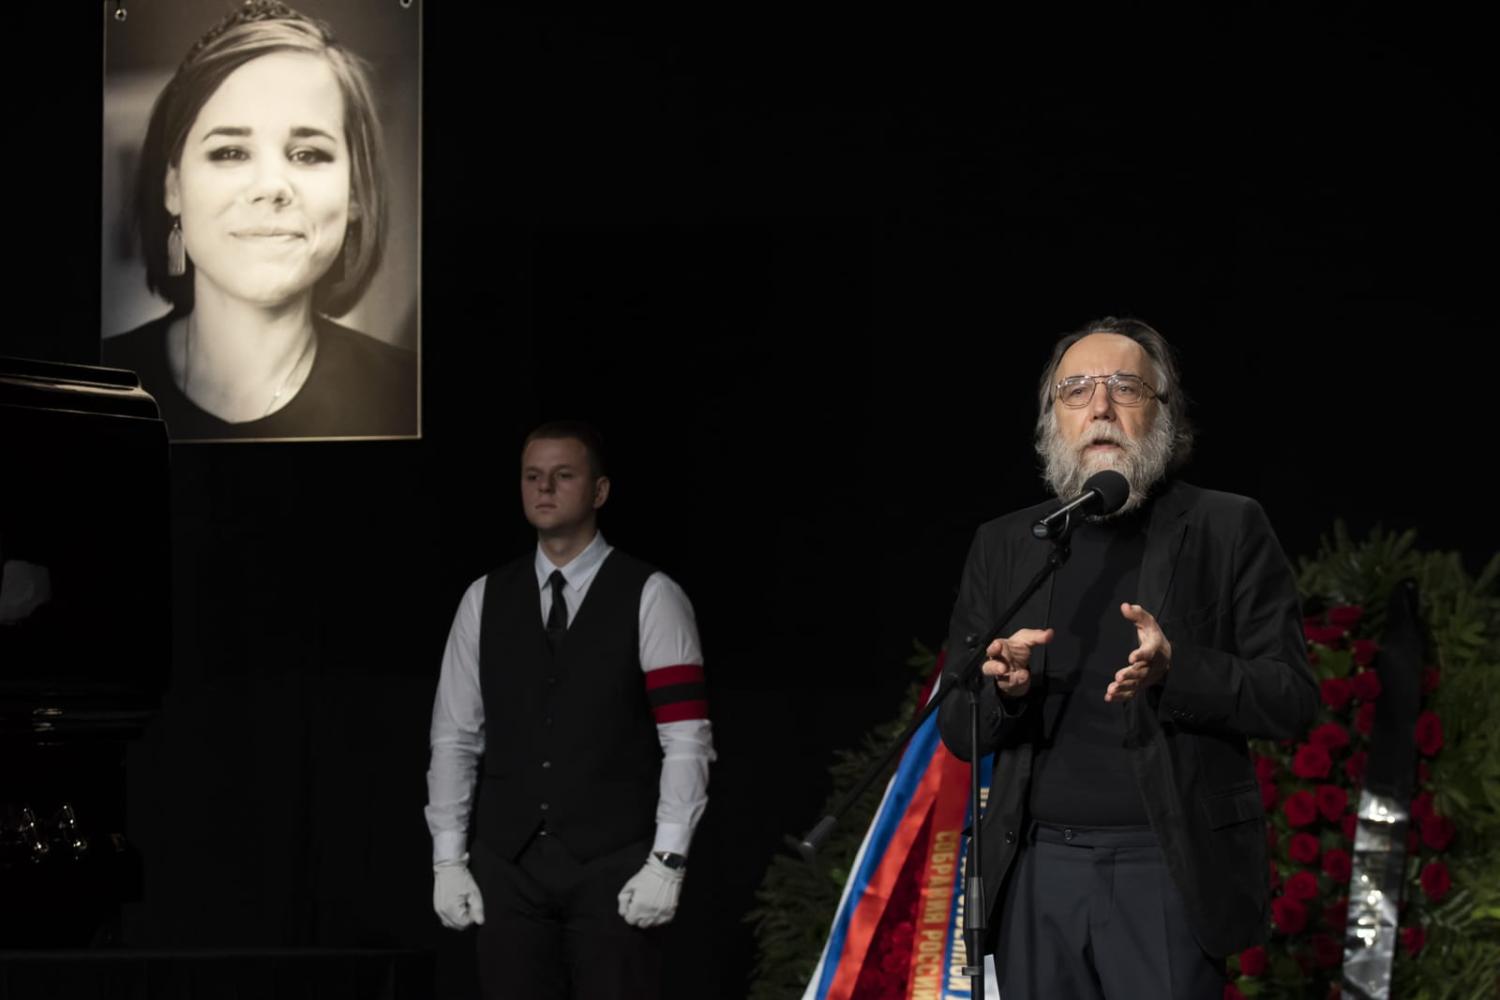 Aleksandr Dugin speaks at a funeral ceremony on 23 August in Moscow, Russia for his daughter Darya Dugina, killed in a car explosion on the outskirts of Moscow last month (Evgenii Bugubaev/Anadolu Agency via Getty Images)